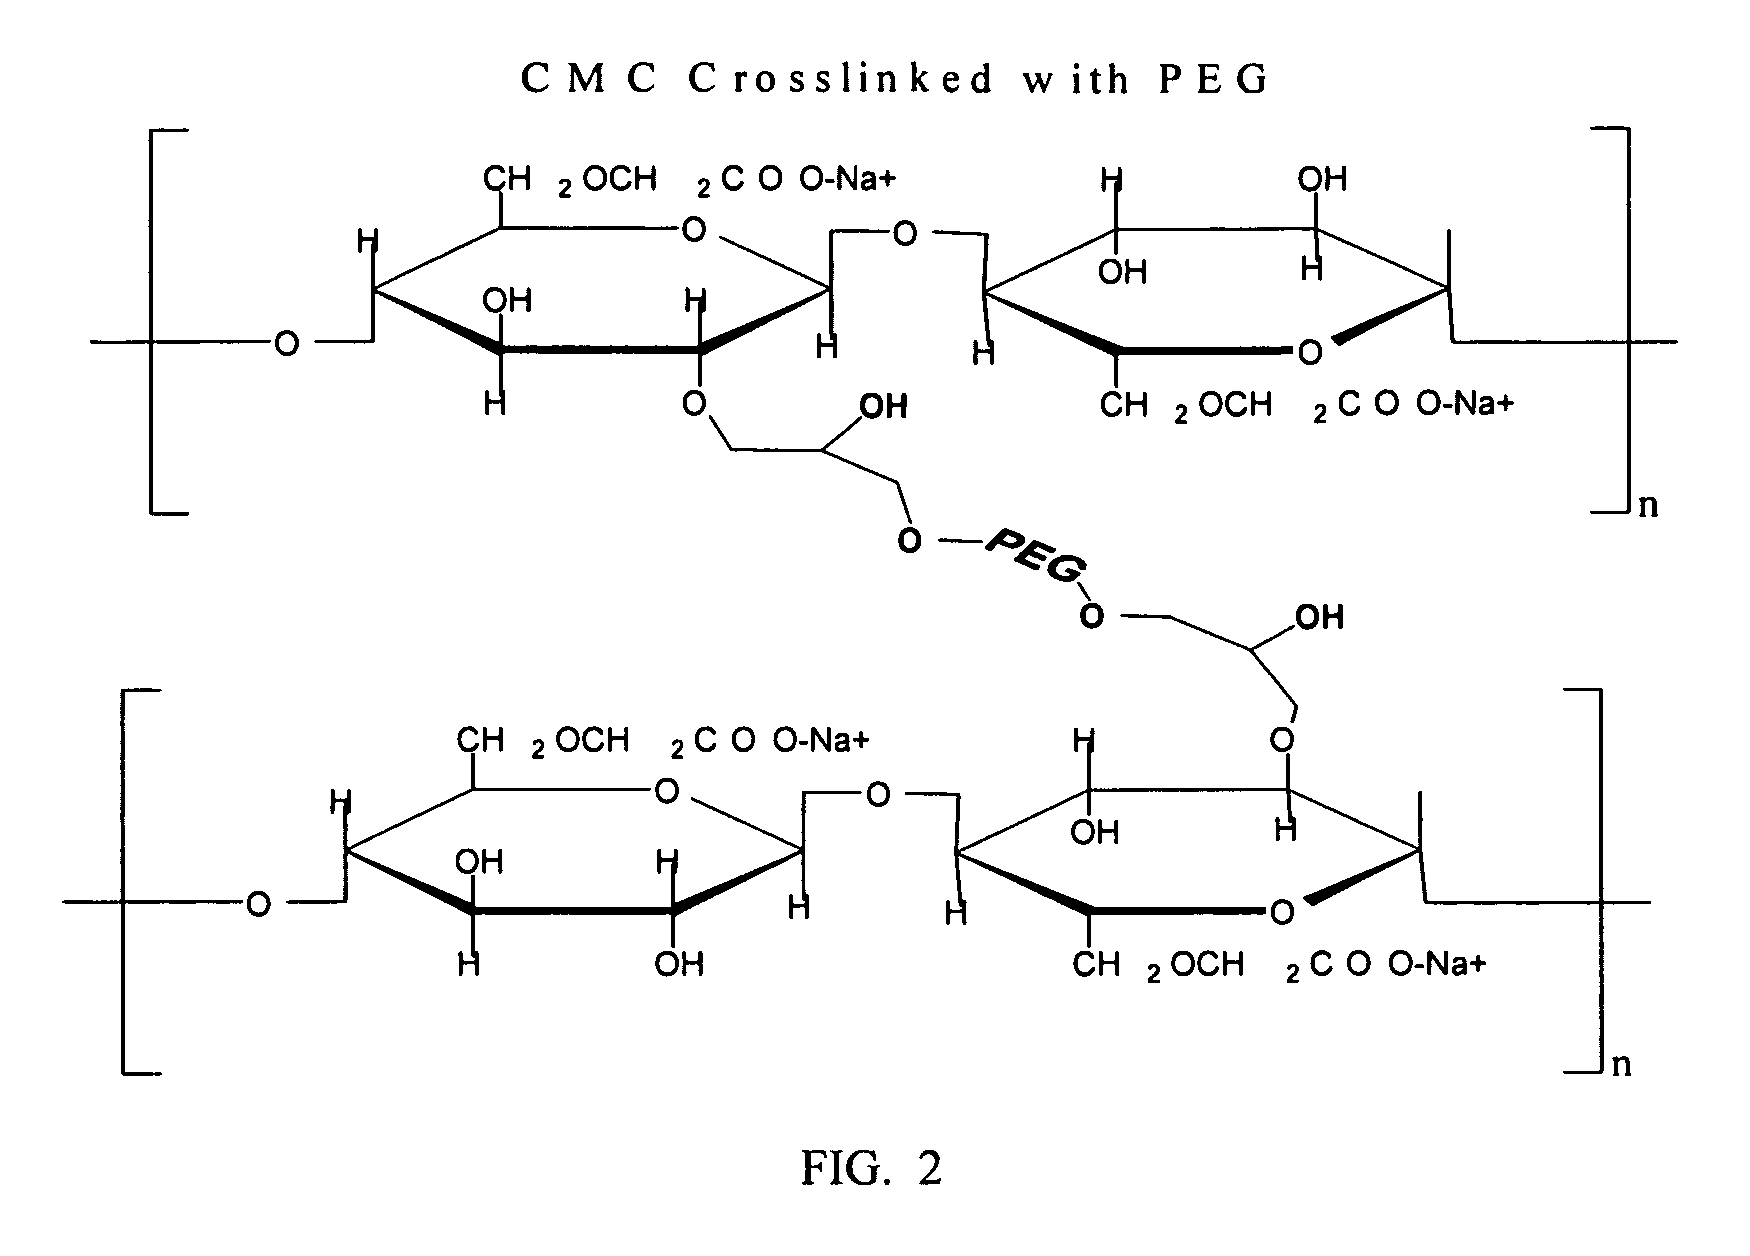 Carboxymethylcellulose polyethylene glycol compositions for medical uses